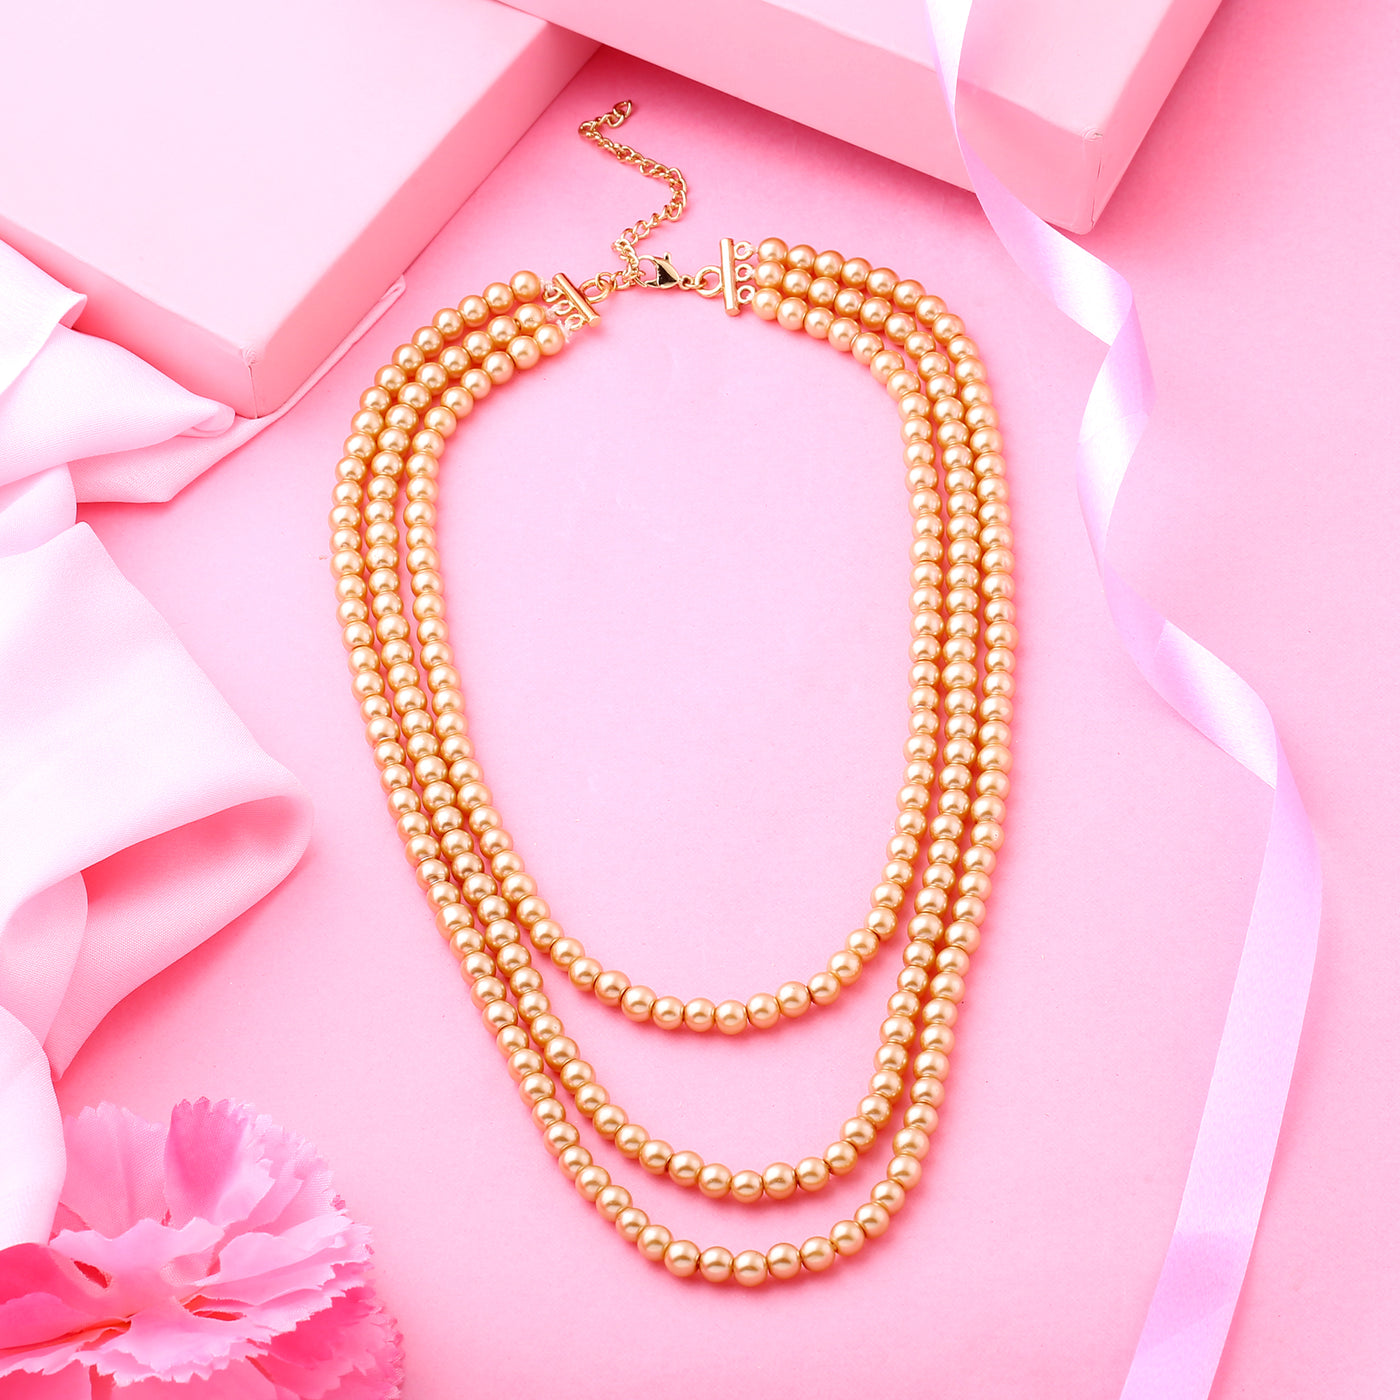 Estele gold pearl three layered necklace